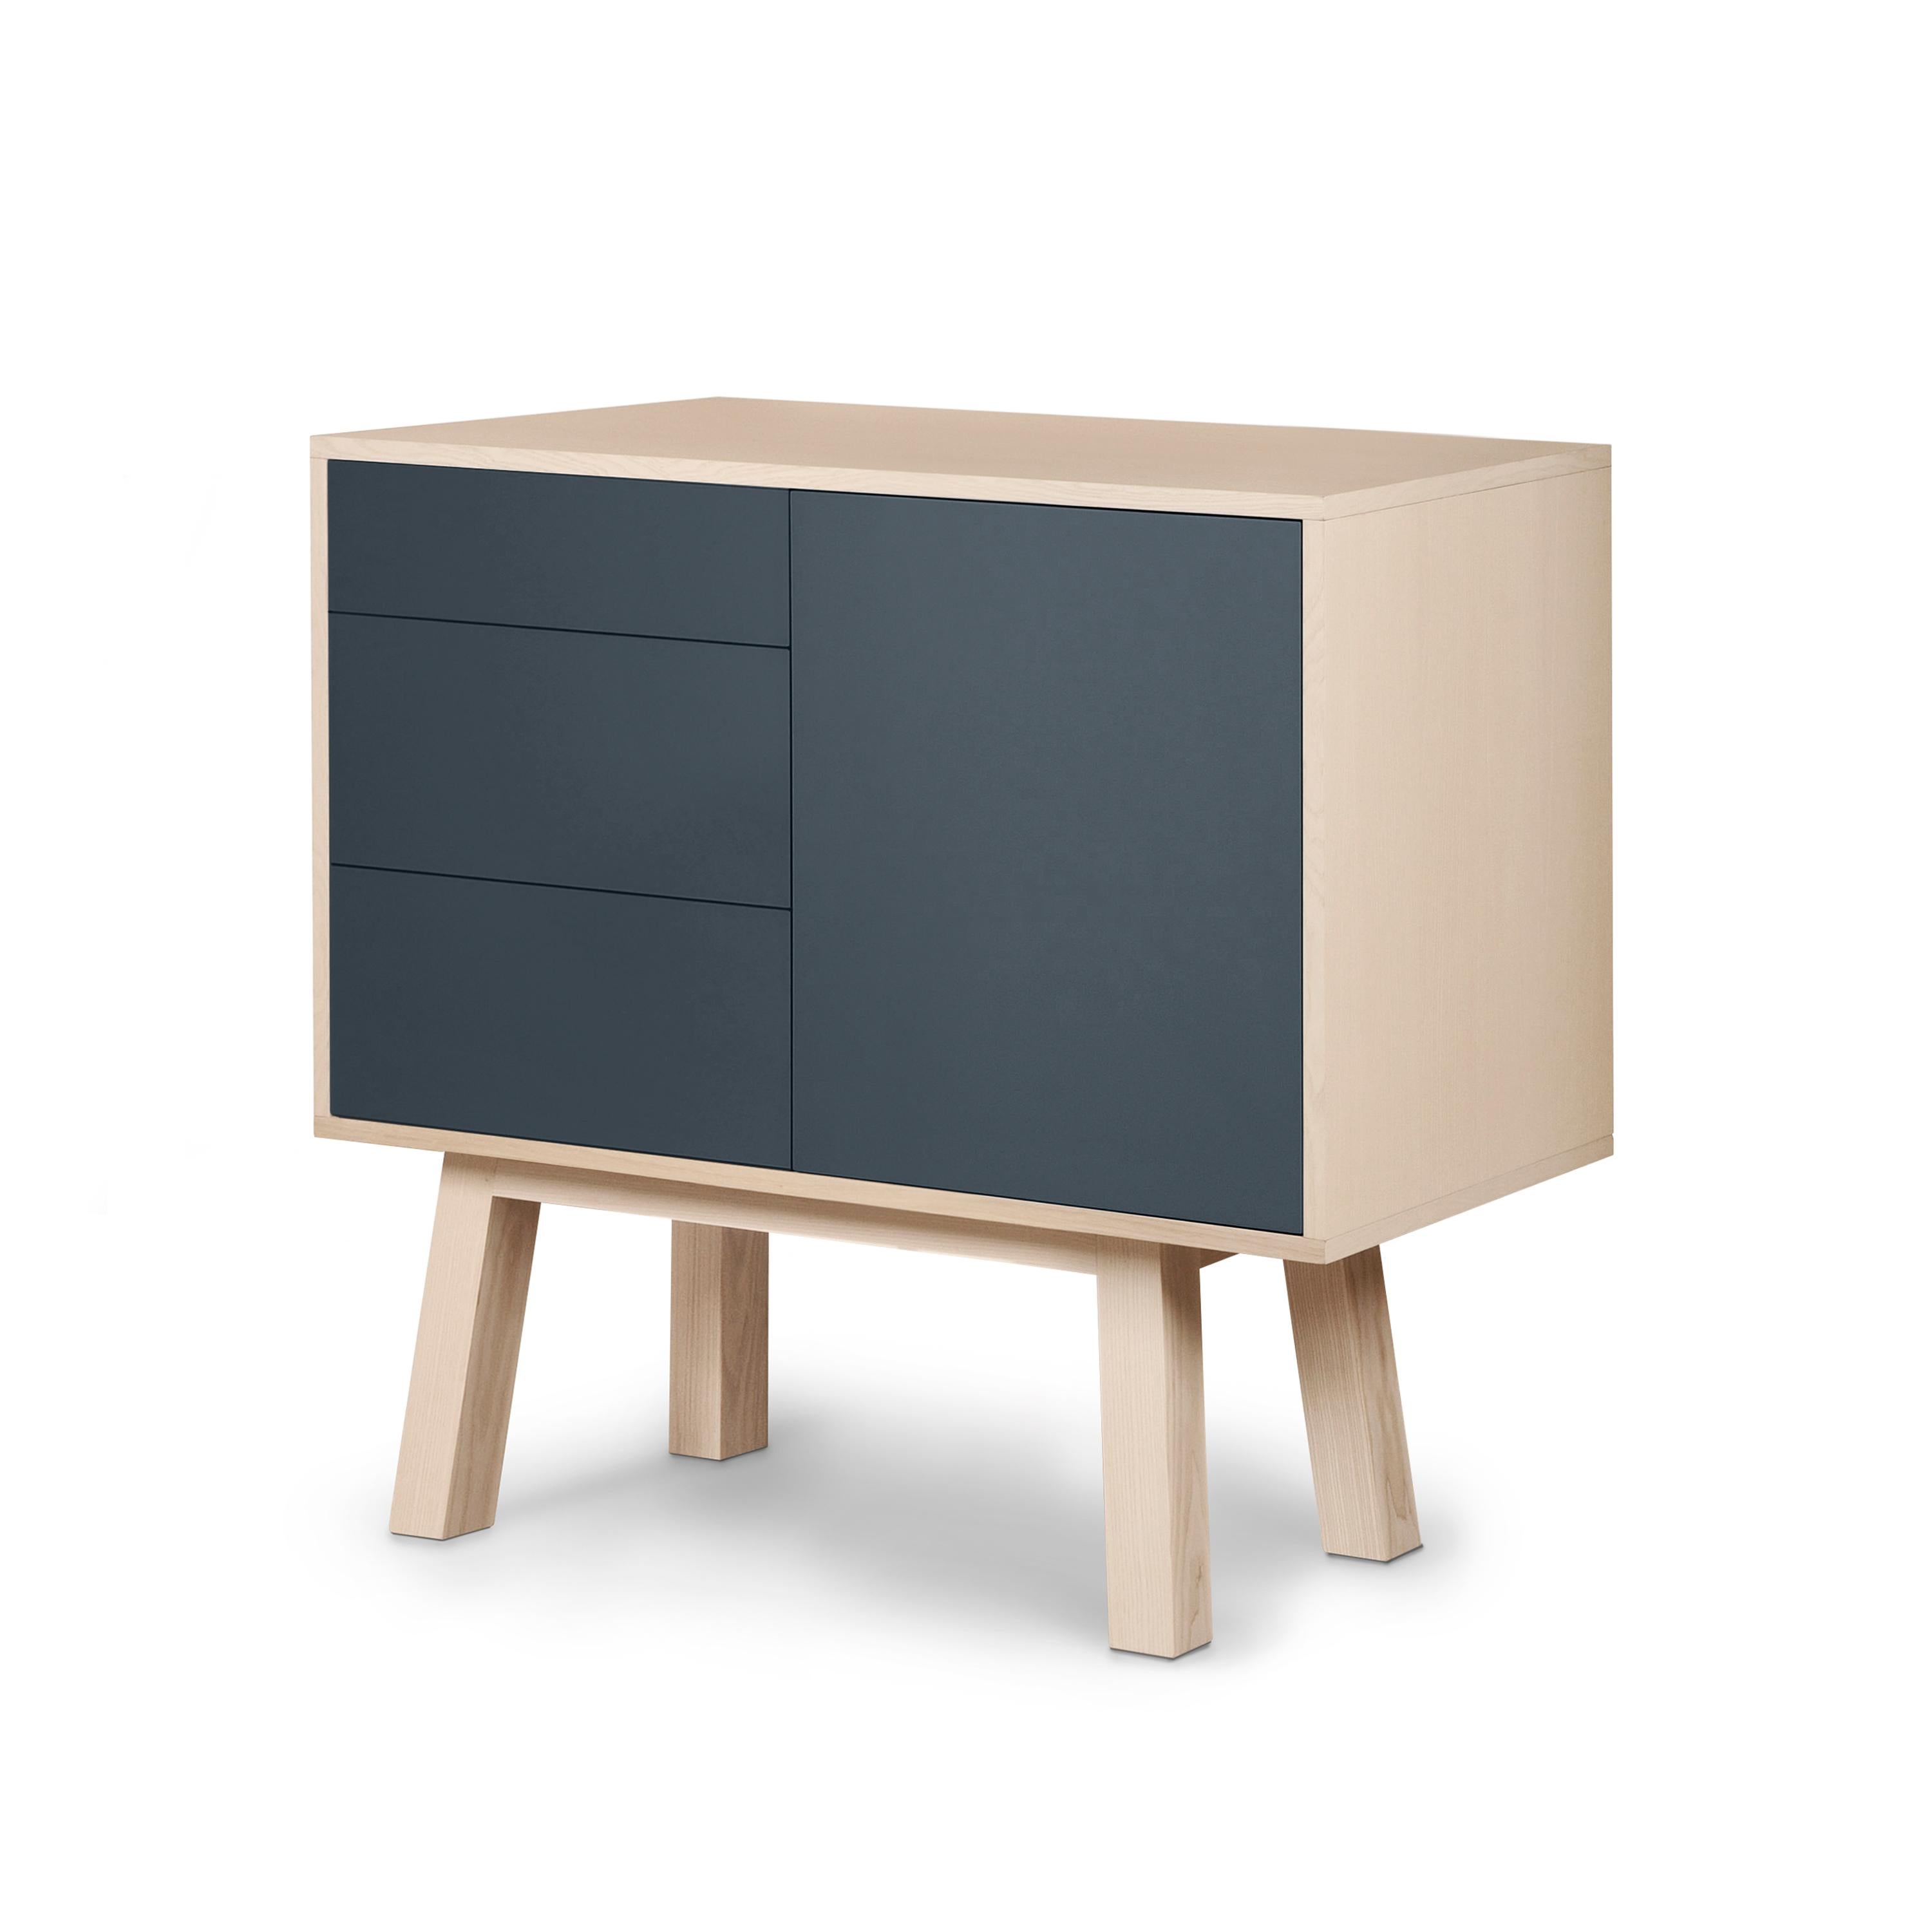 This 1-door and 3-drawer sideboard is designed by Eric Gizard - Paris.

It is 100% made in France with solid ash wood, veneer and lacquered doors in MDF panels. 

Each door and each drawer opens with a 